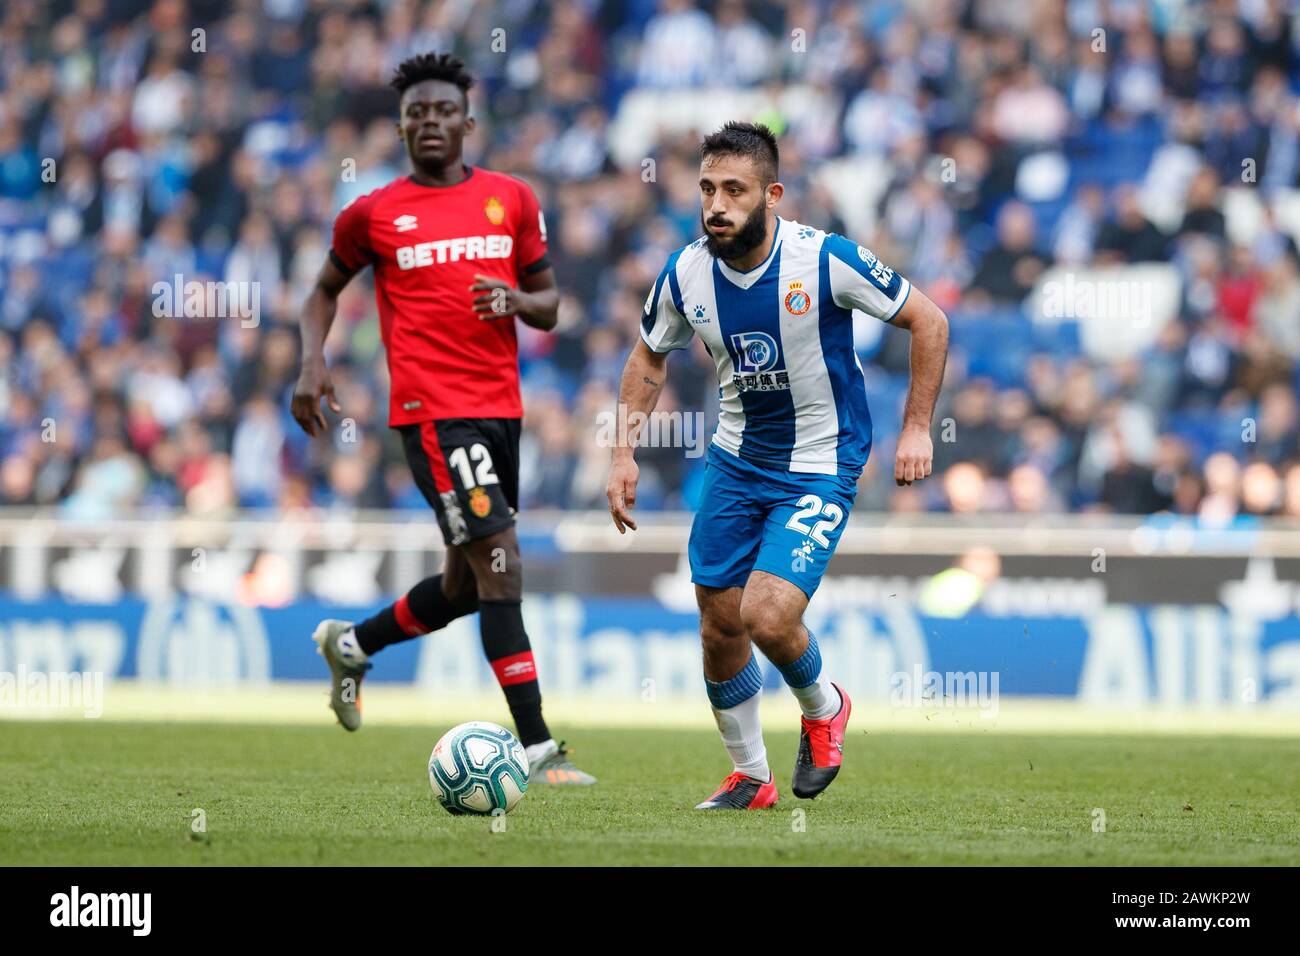 Cornella Del Llobregat, Spain. 09th Feb, 2020. BARCELONA, SPAIN - FEBRUARY 09: Matias Vargas of RCD Espanyol in action during the Liga match between RCD Espanyol and FC Barcelona at RCD Stadium on February 09, 2020 in Barcelona, Spain. Credit: Dax Images/Alamy Live News Stock Photo